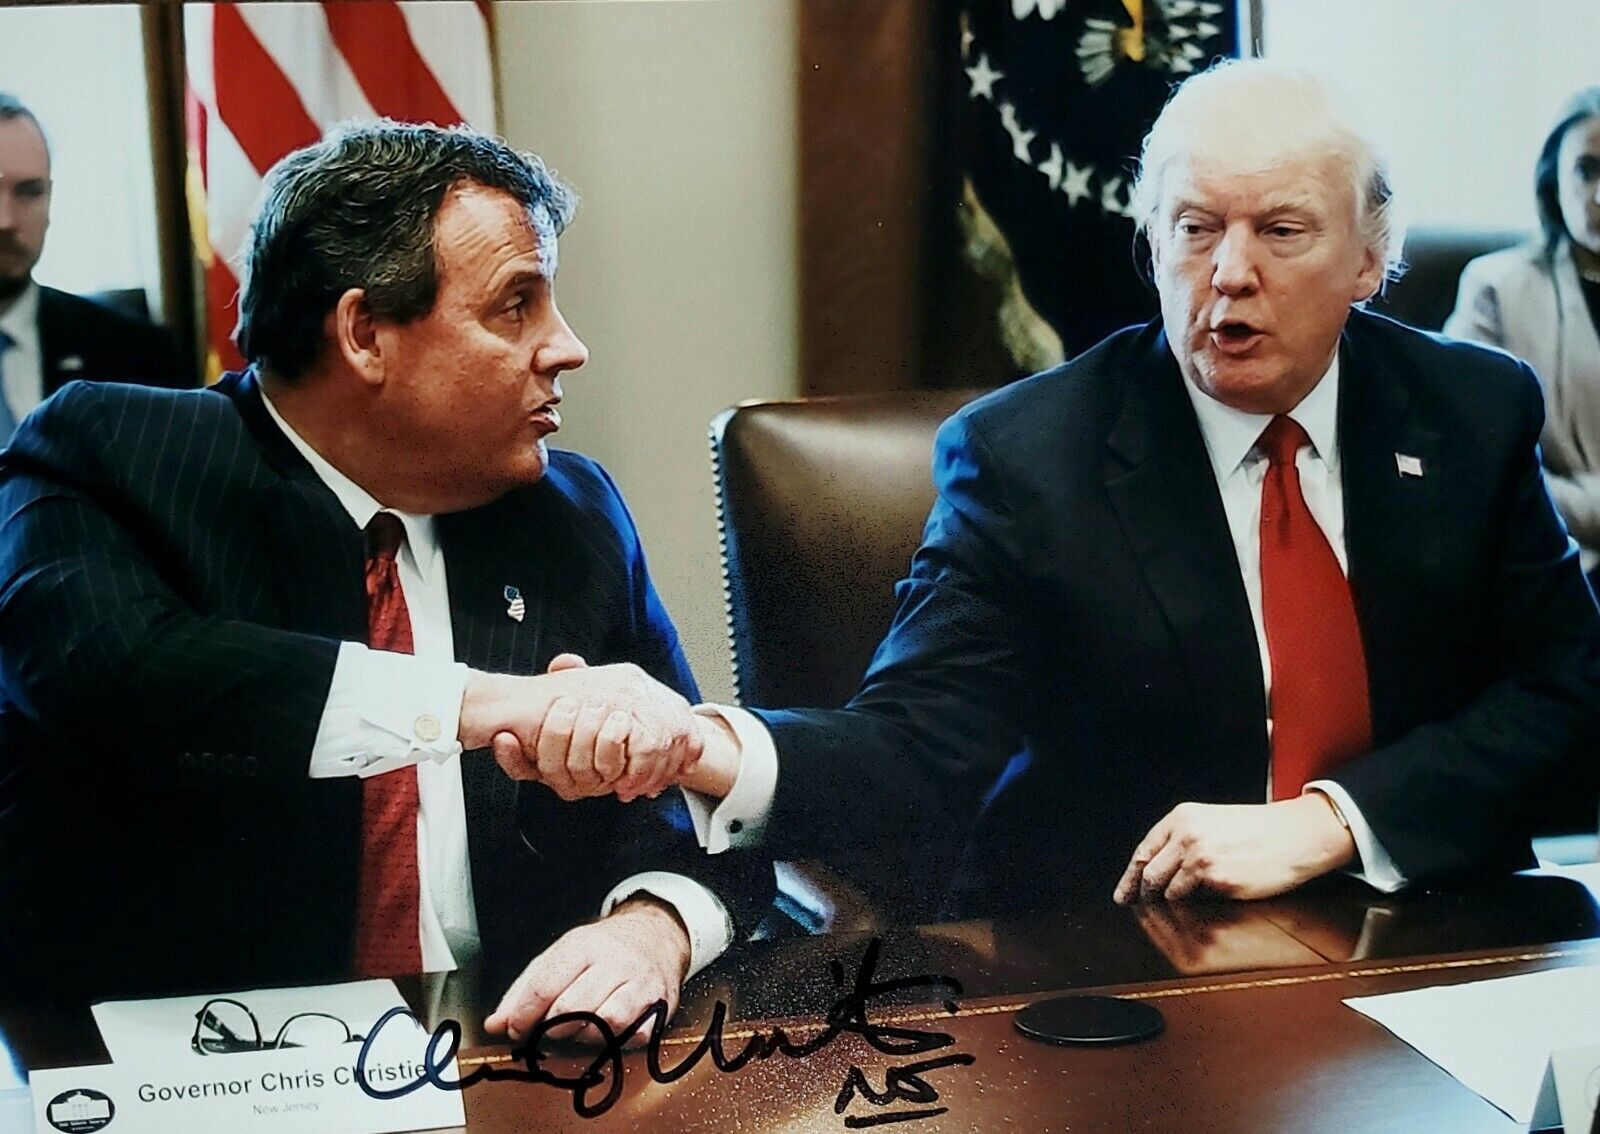 Chris Christie Hand Signed Autograph Photo Poster painting New Jersey Governor Republican Trump